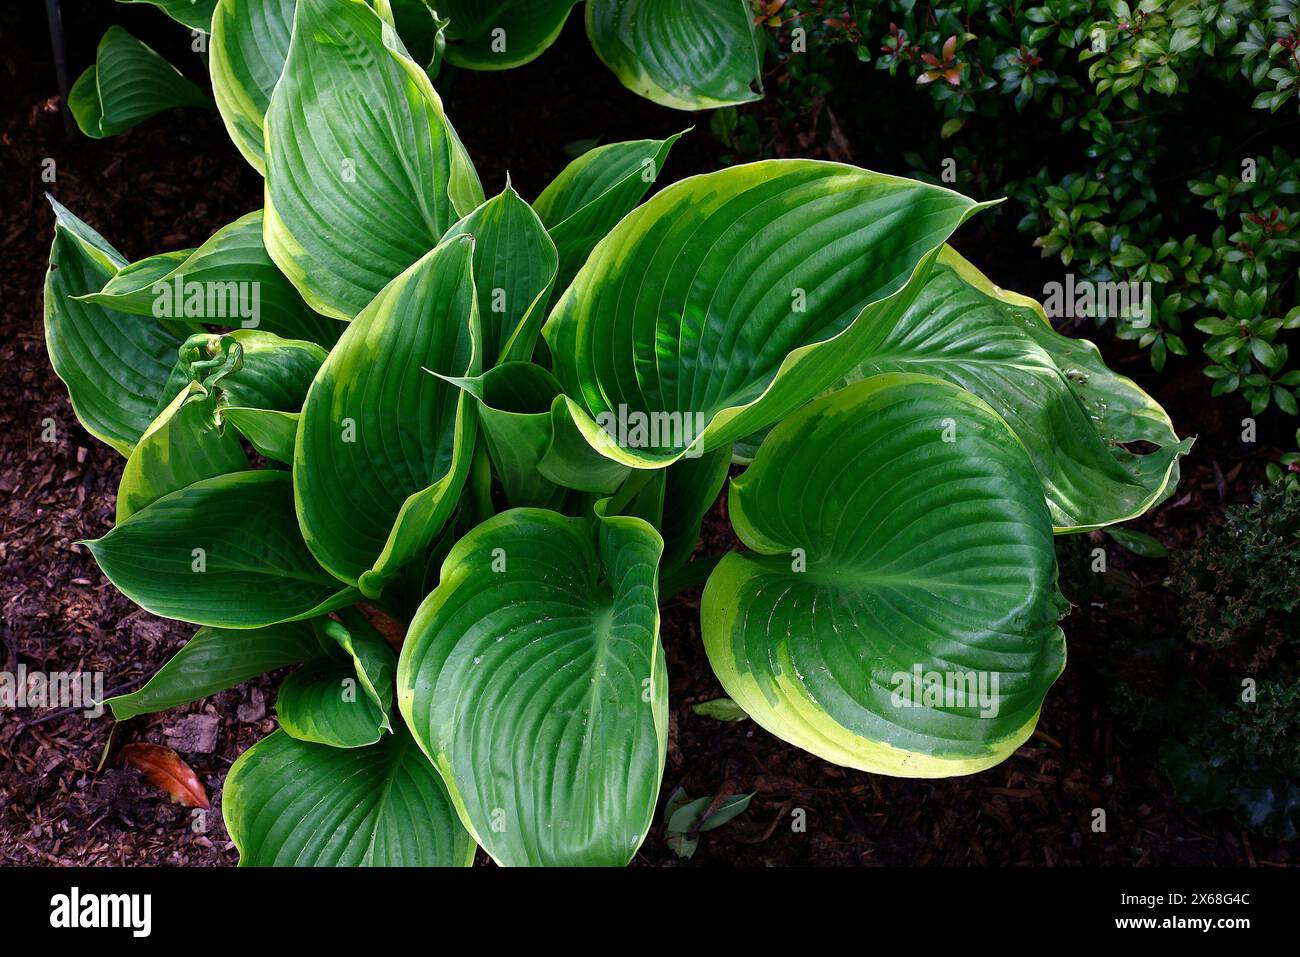 Closeup of the large green leaves with yellow cream margins of the herbaceous perennial garden plantain lily plant Hosta winter snow. Stock Photo